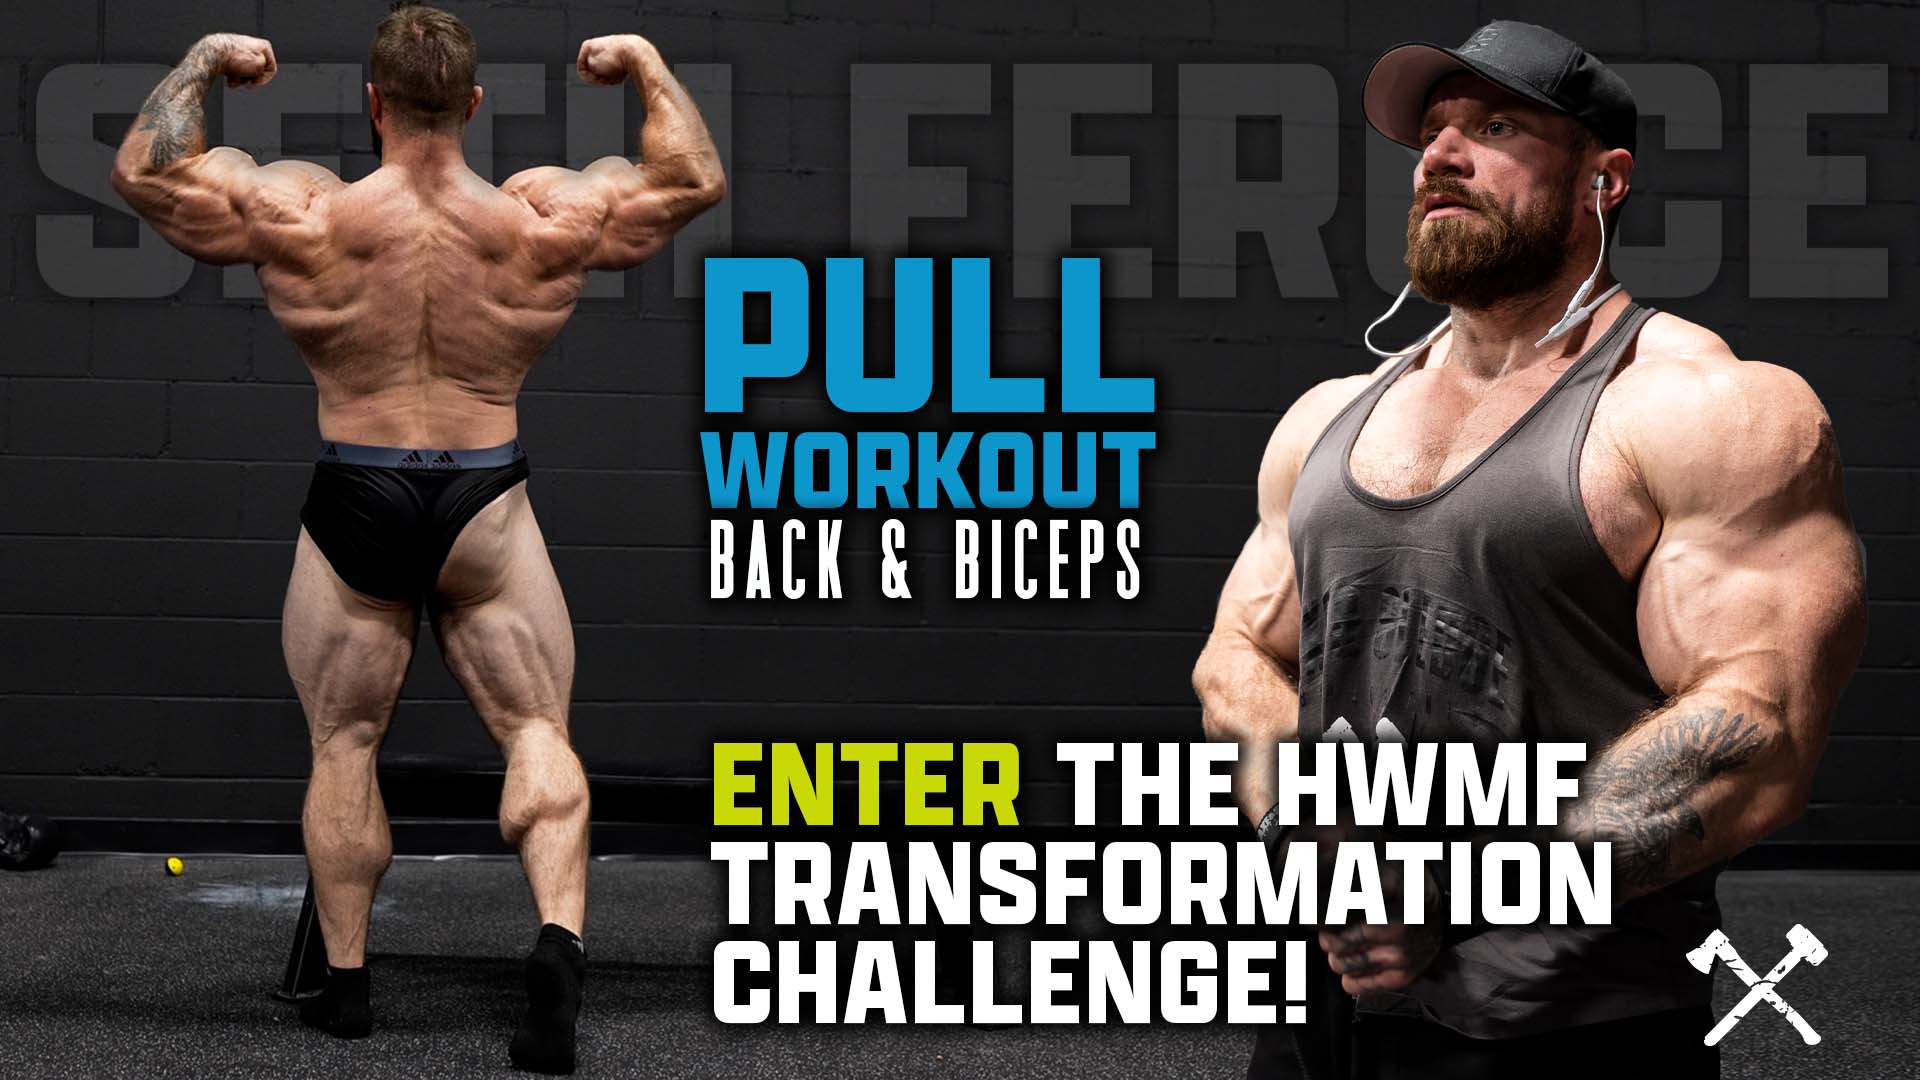 Seth Feroce's Pull Workout Explained